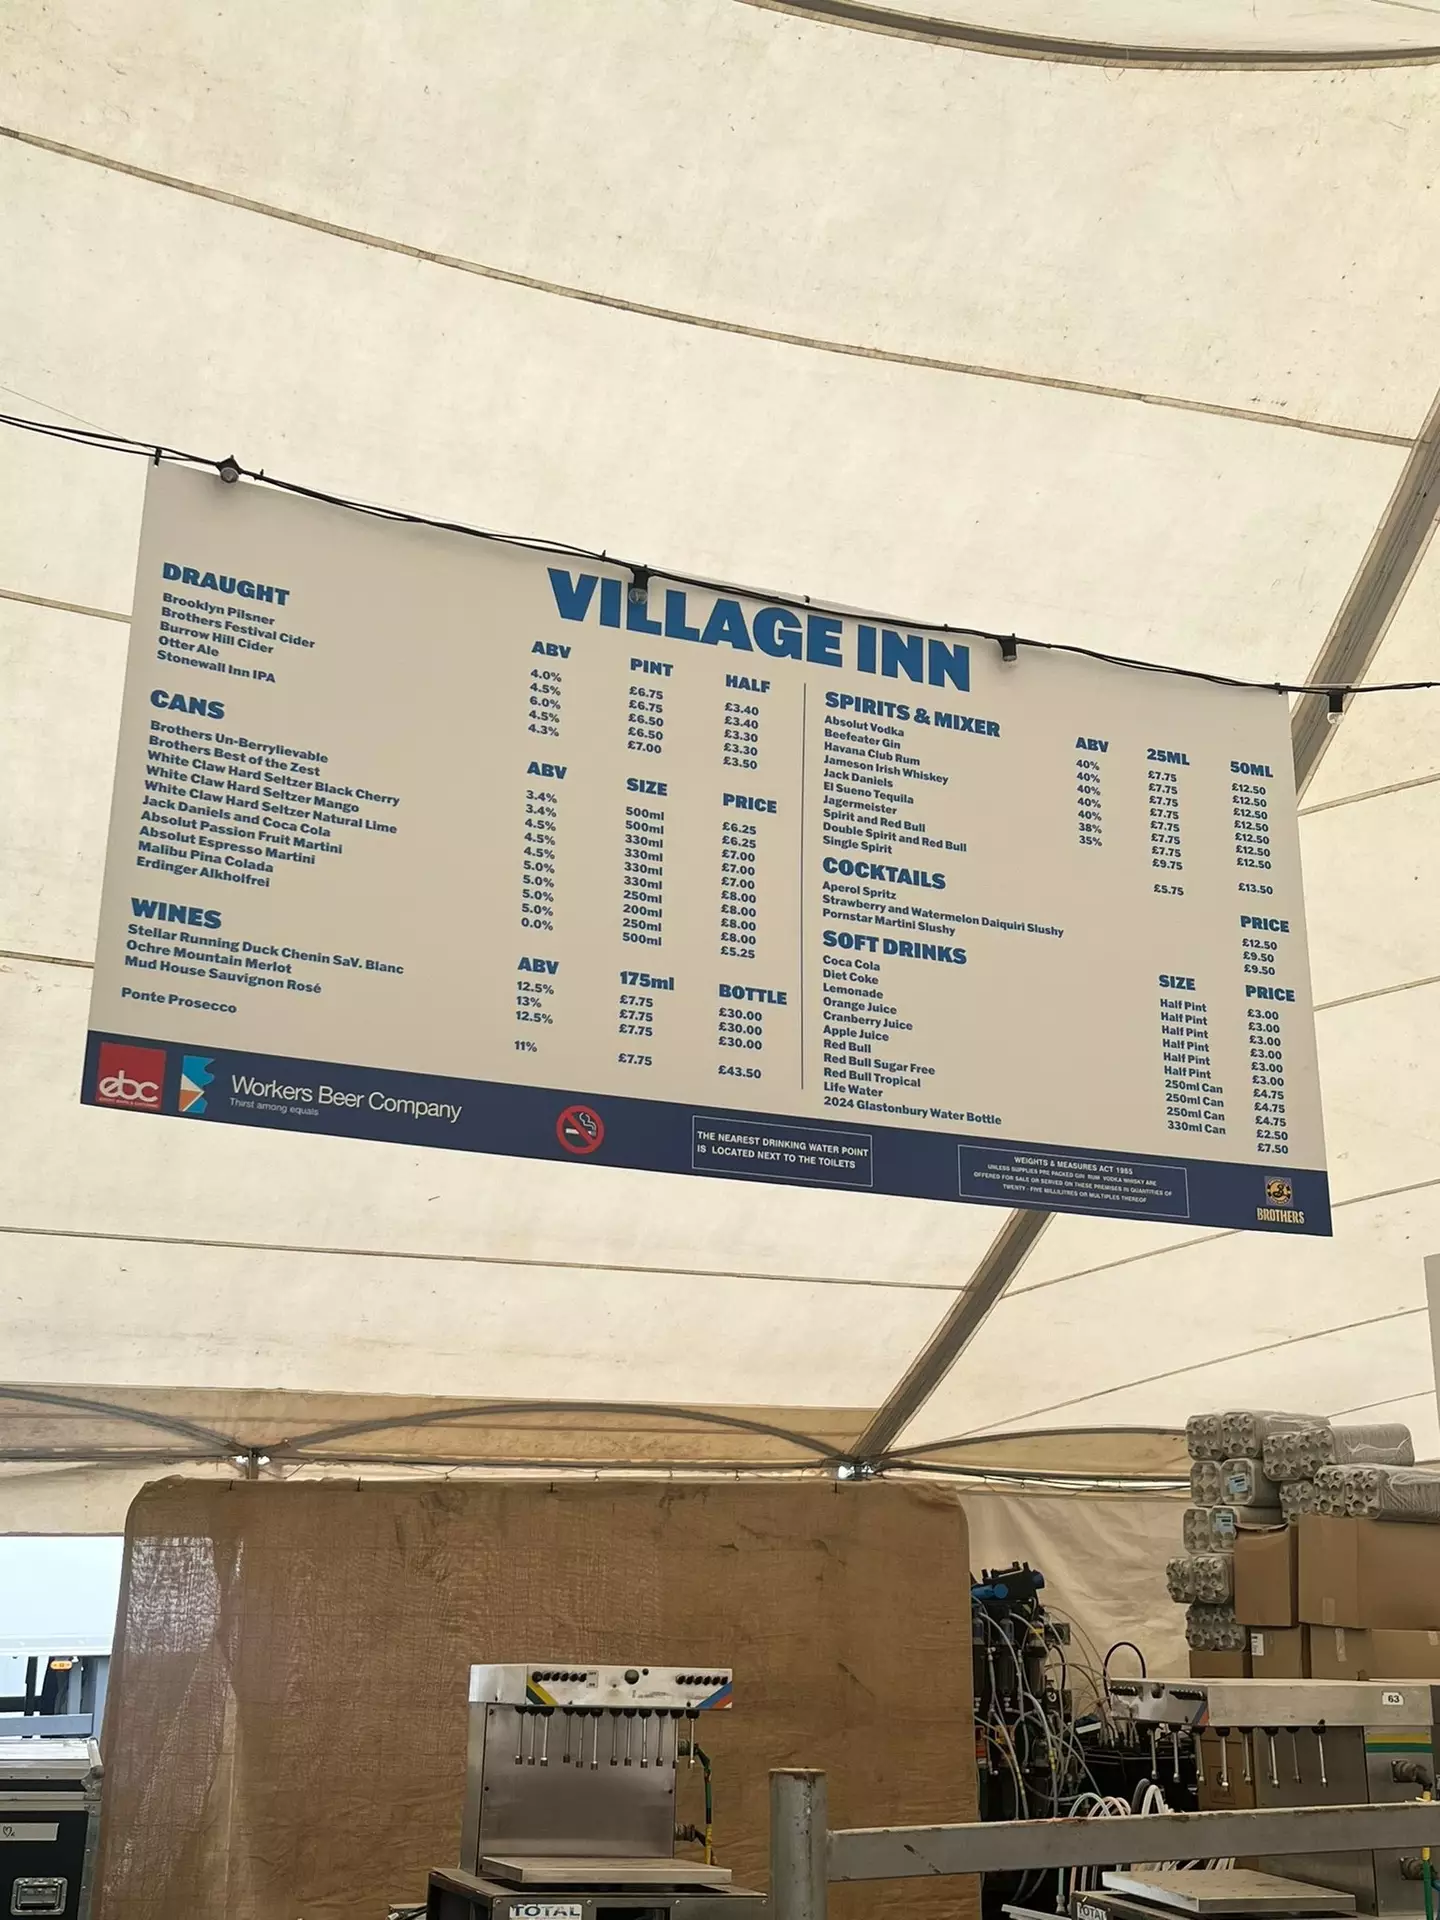 The drinks prices for this year's Glastonbury aren't cheap... (X/@glastobation)